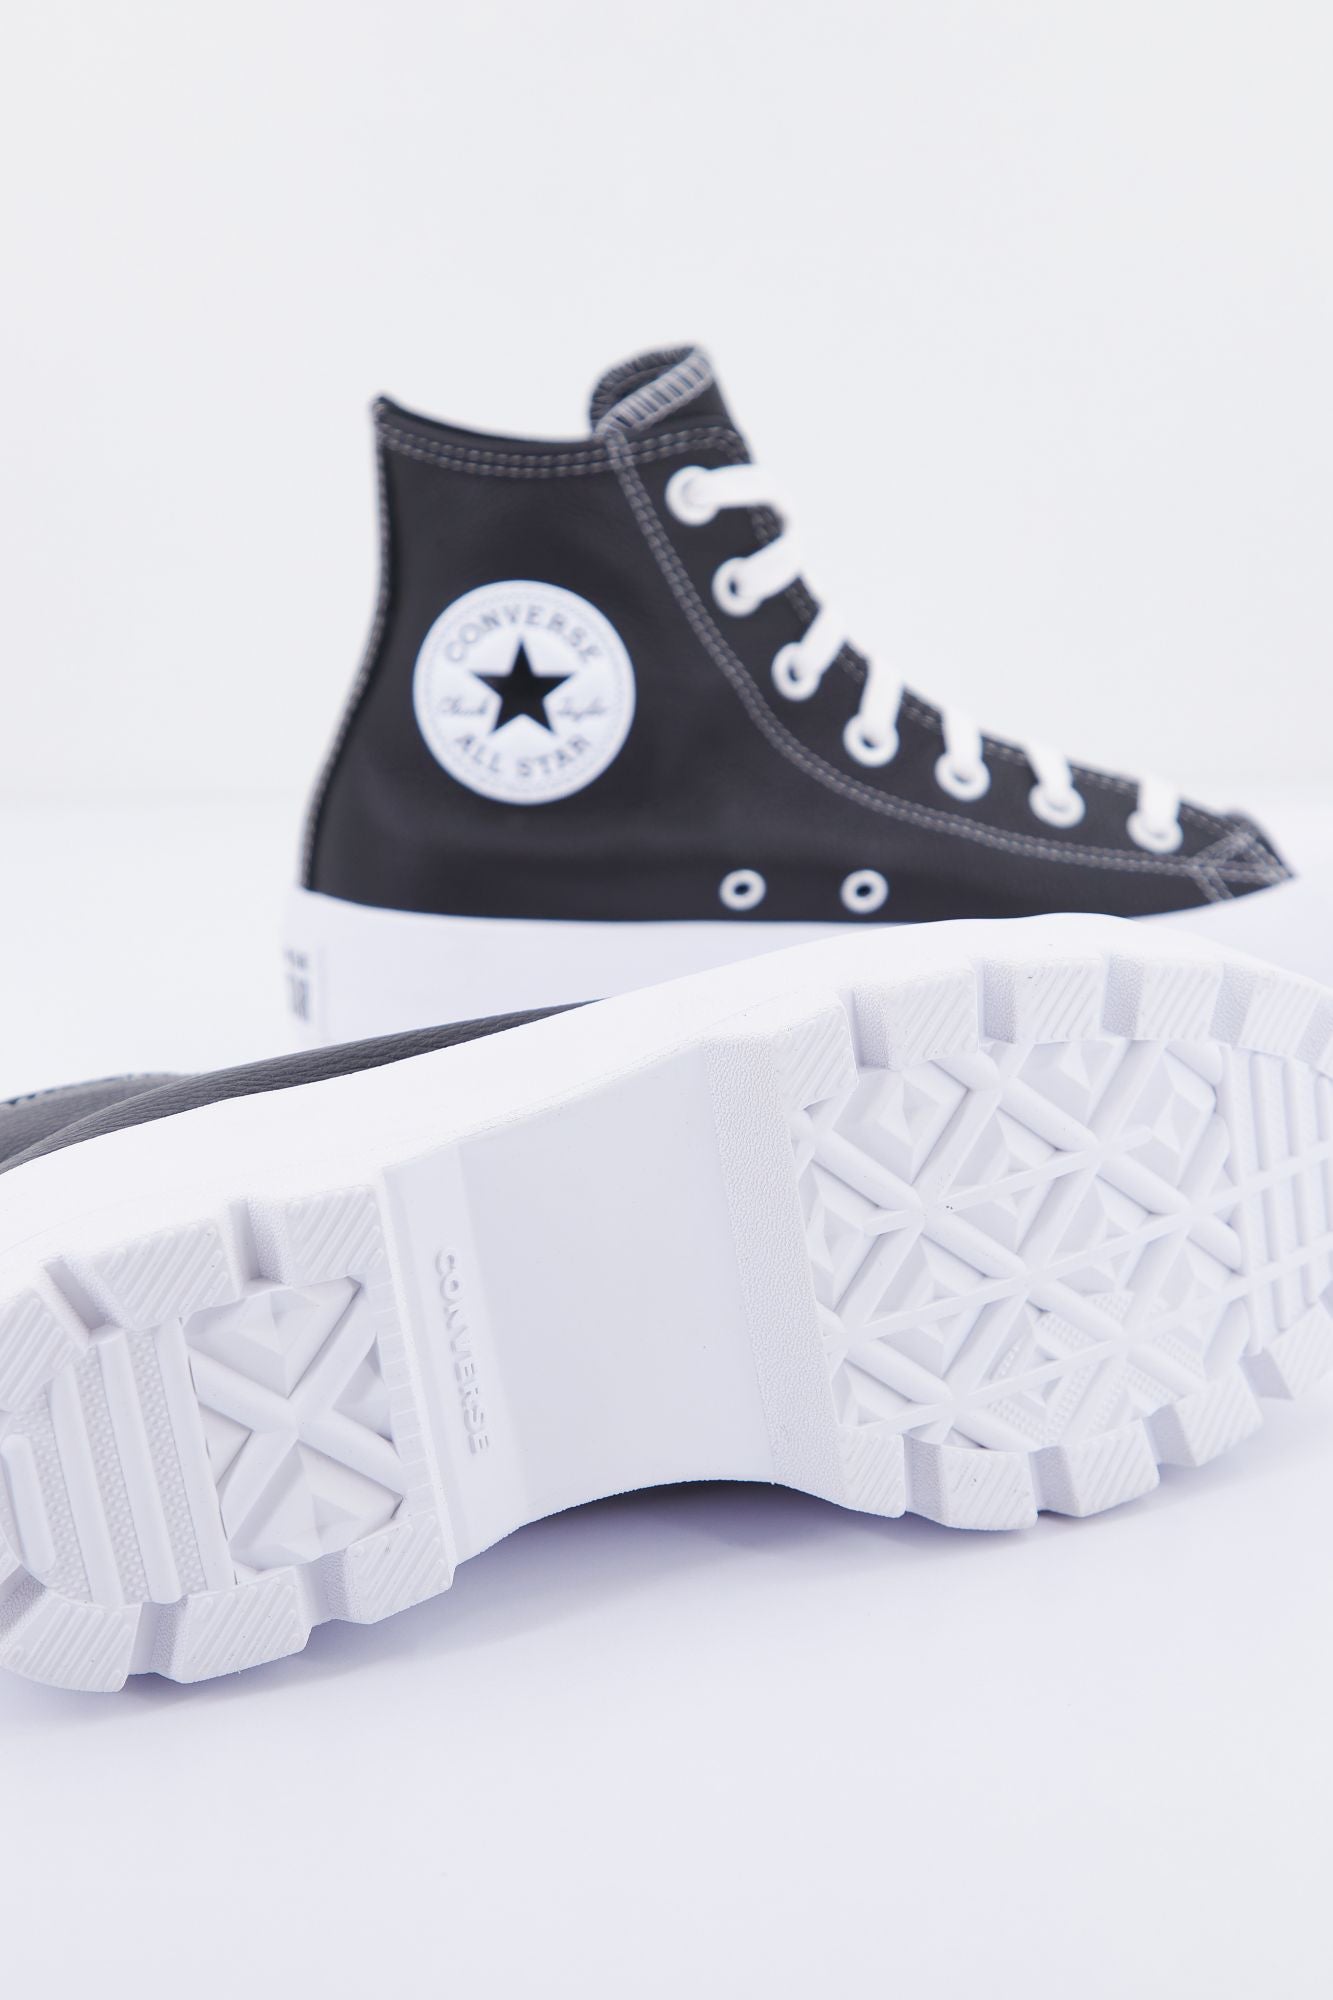 CONVERSE CHUCK TAYLOR ALL STAR LUGGED PLATAFORM LEATHER en color NEGRO (4)